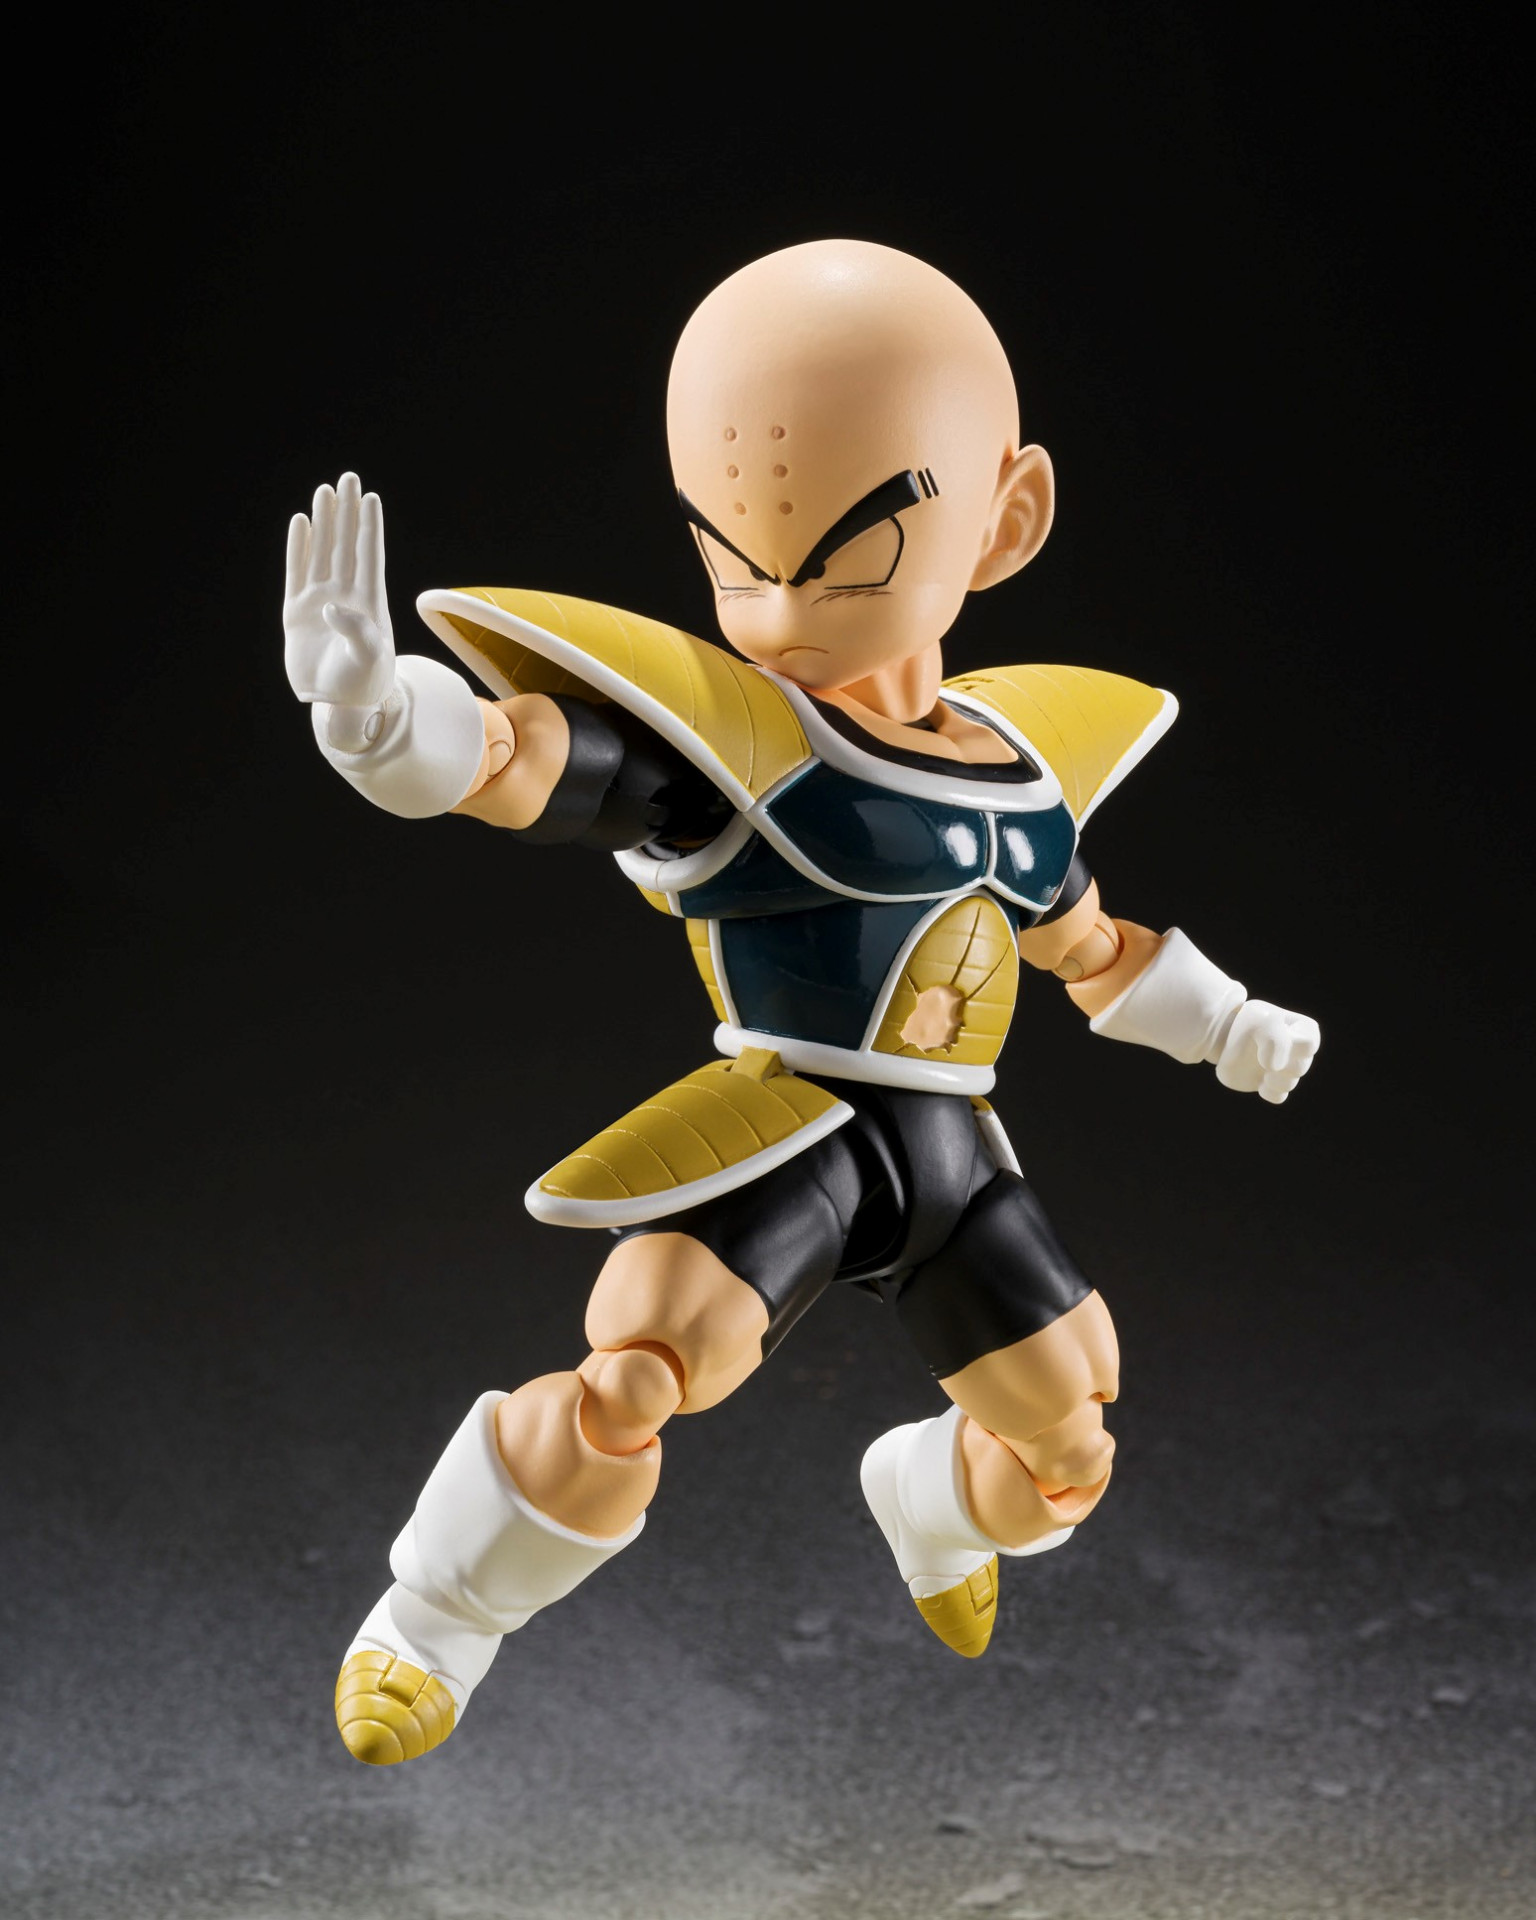  Releases New Krillin -Battle Armor- Figure!] | DRAGON BALL  OFFICIAL SITE